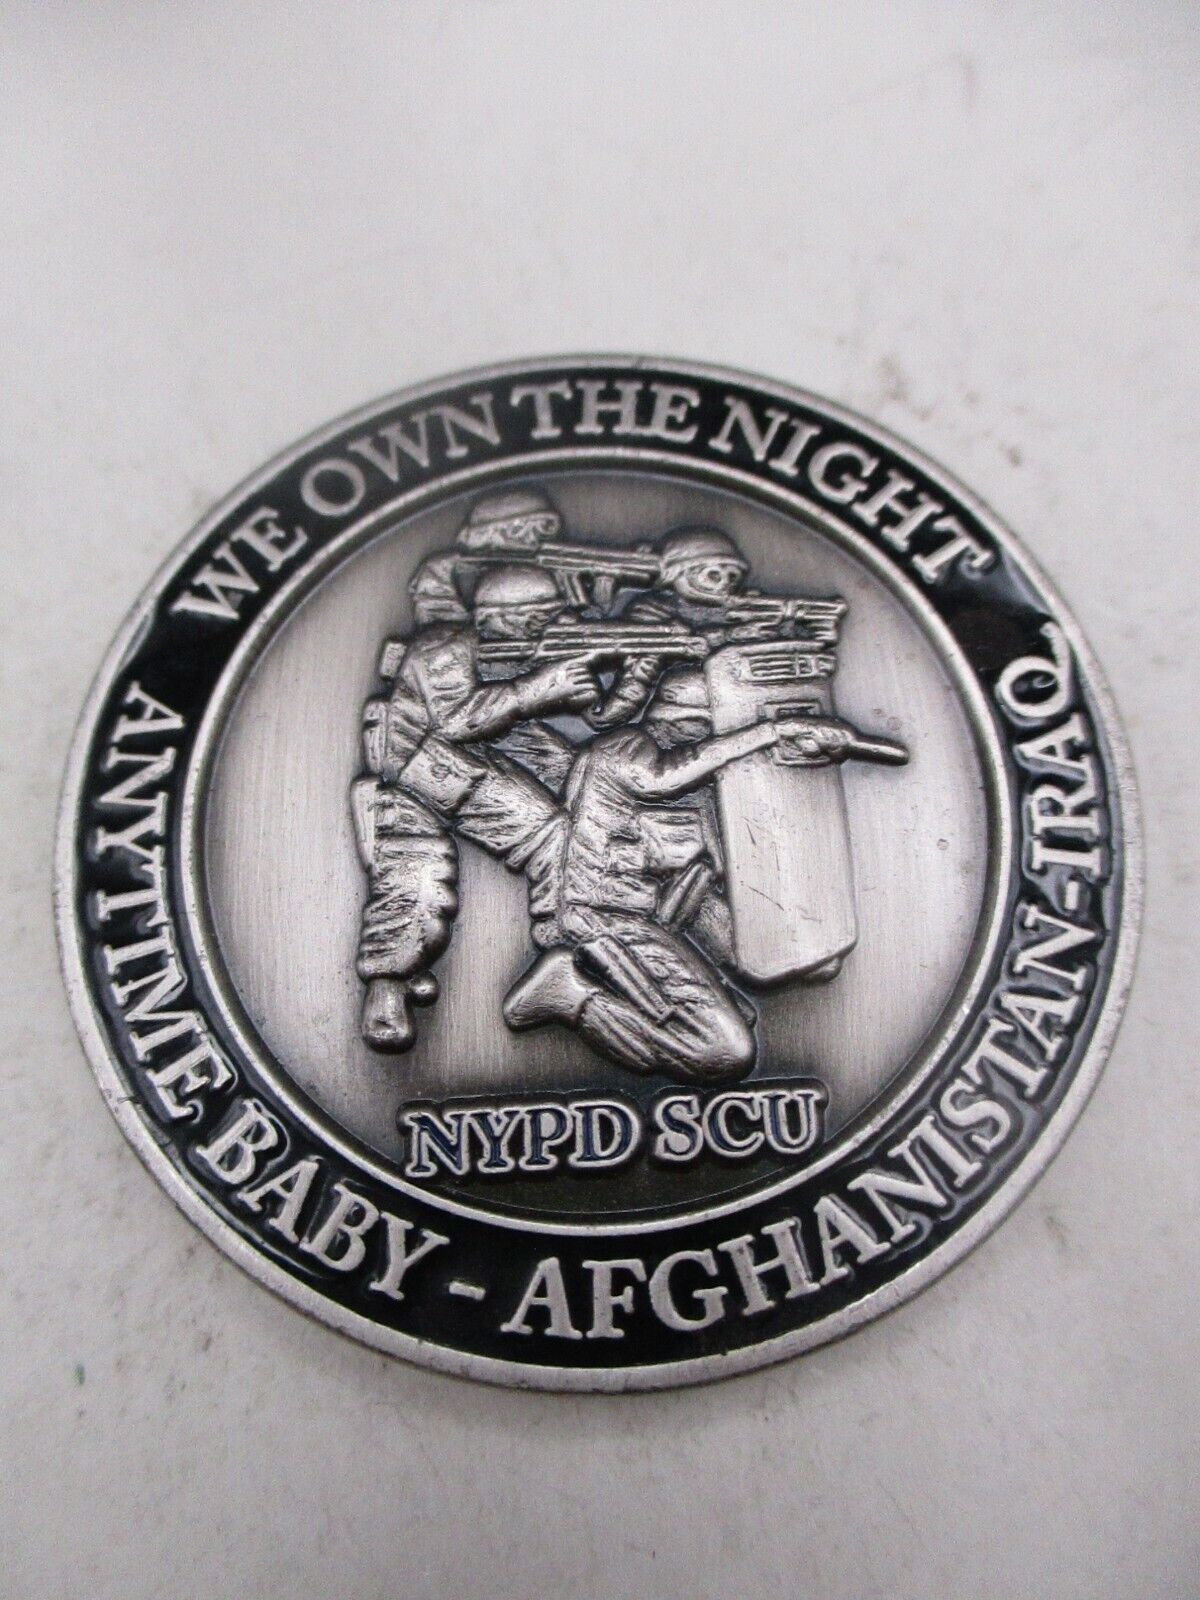 NYPD SCU Joint Improvised Explosive Device Defeat Organization Challenge Coin